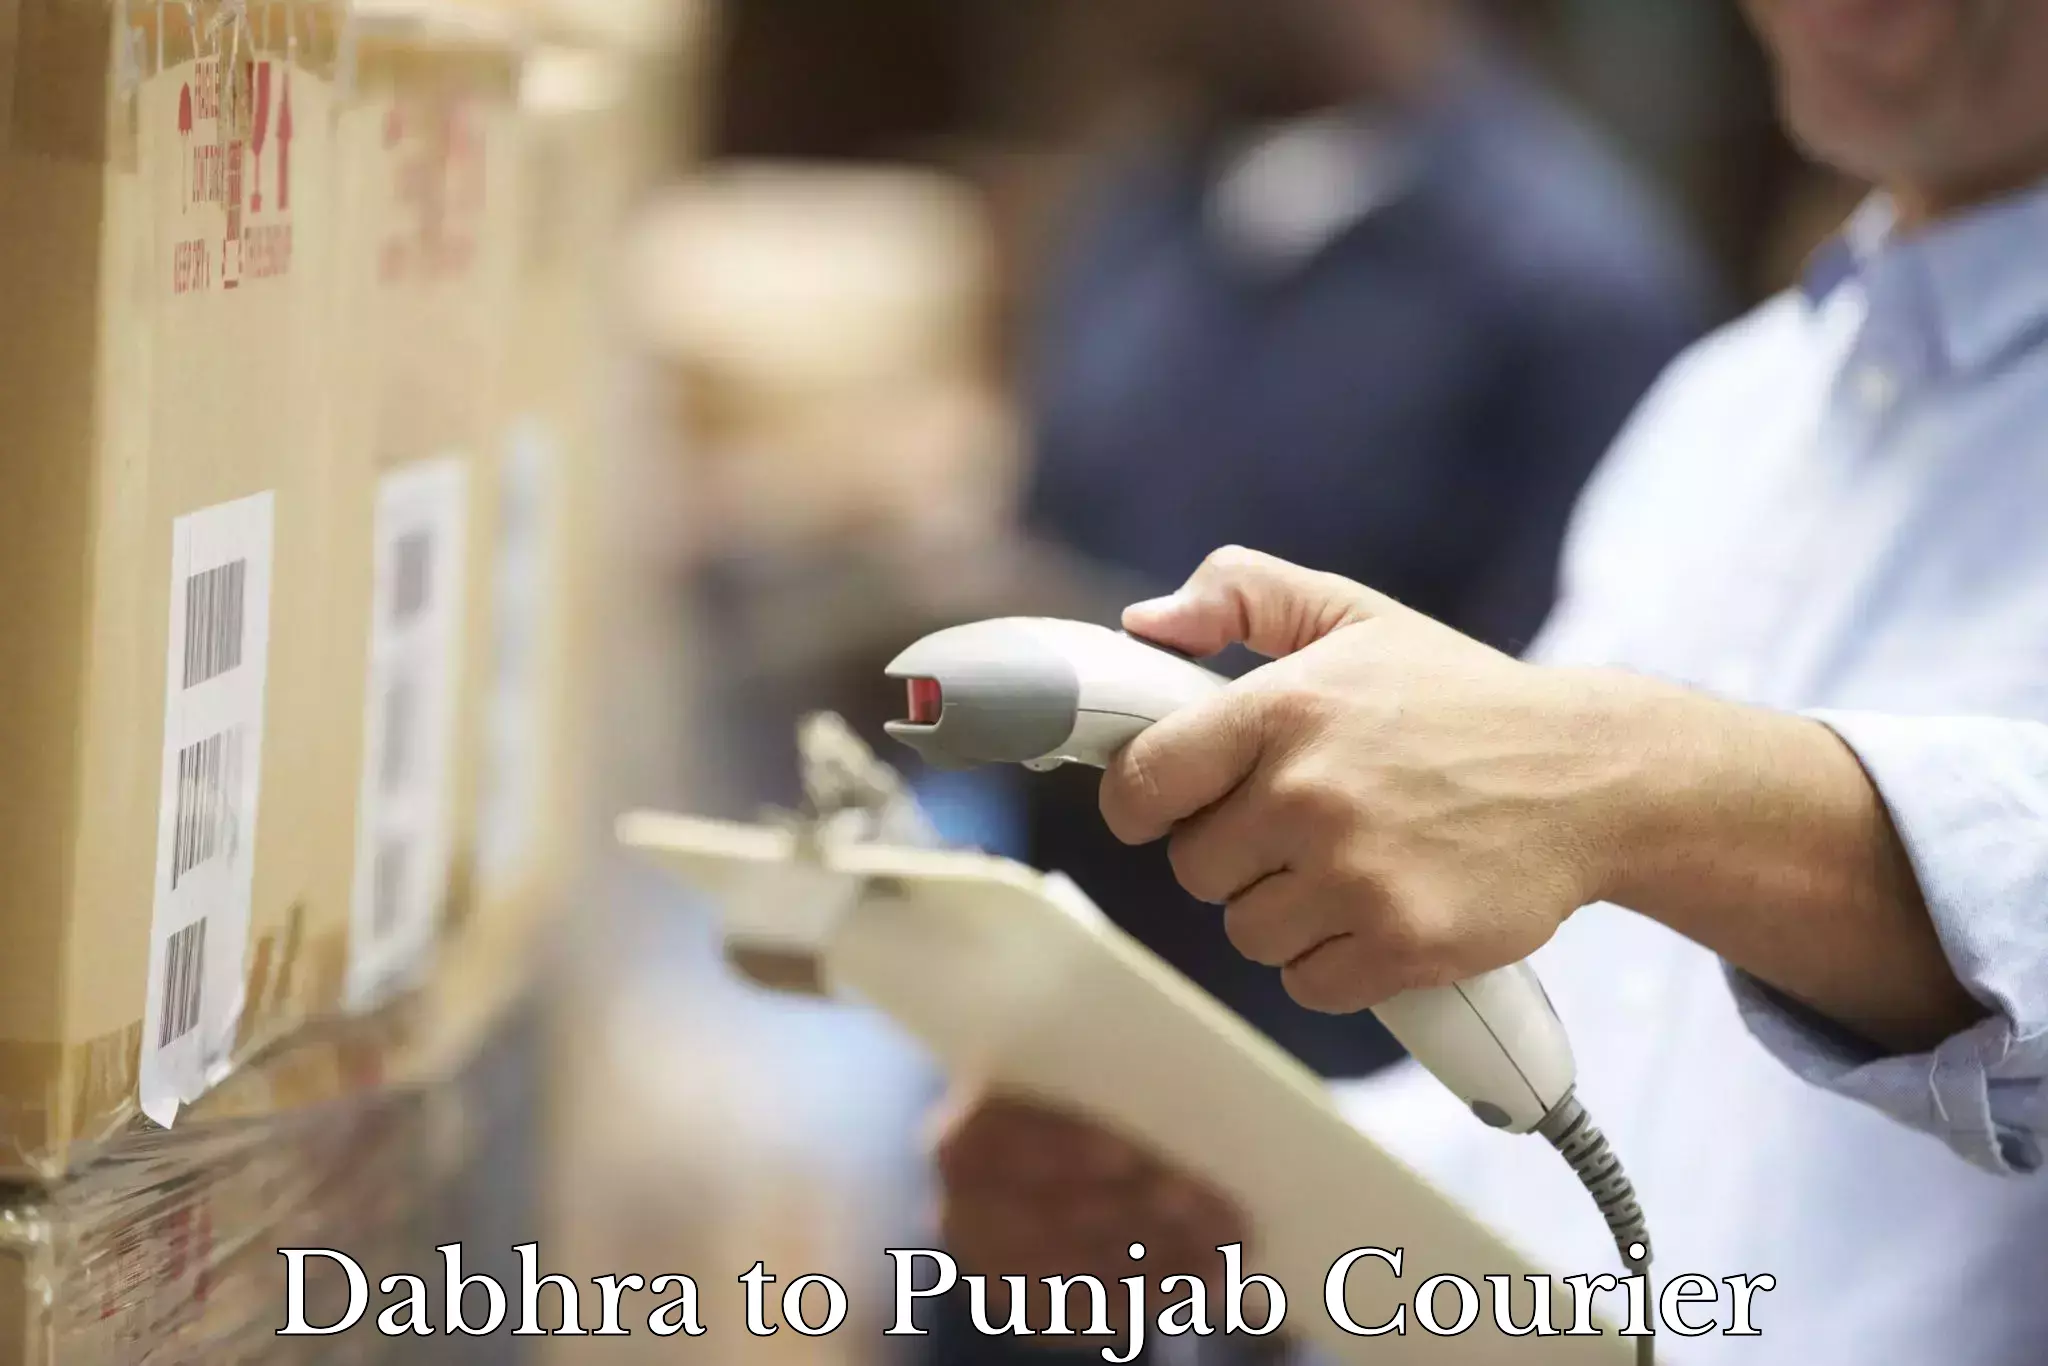 Reliable delivery network Dabhra to Nakodar